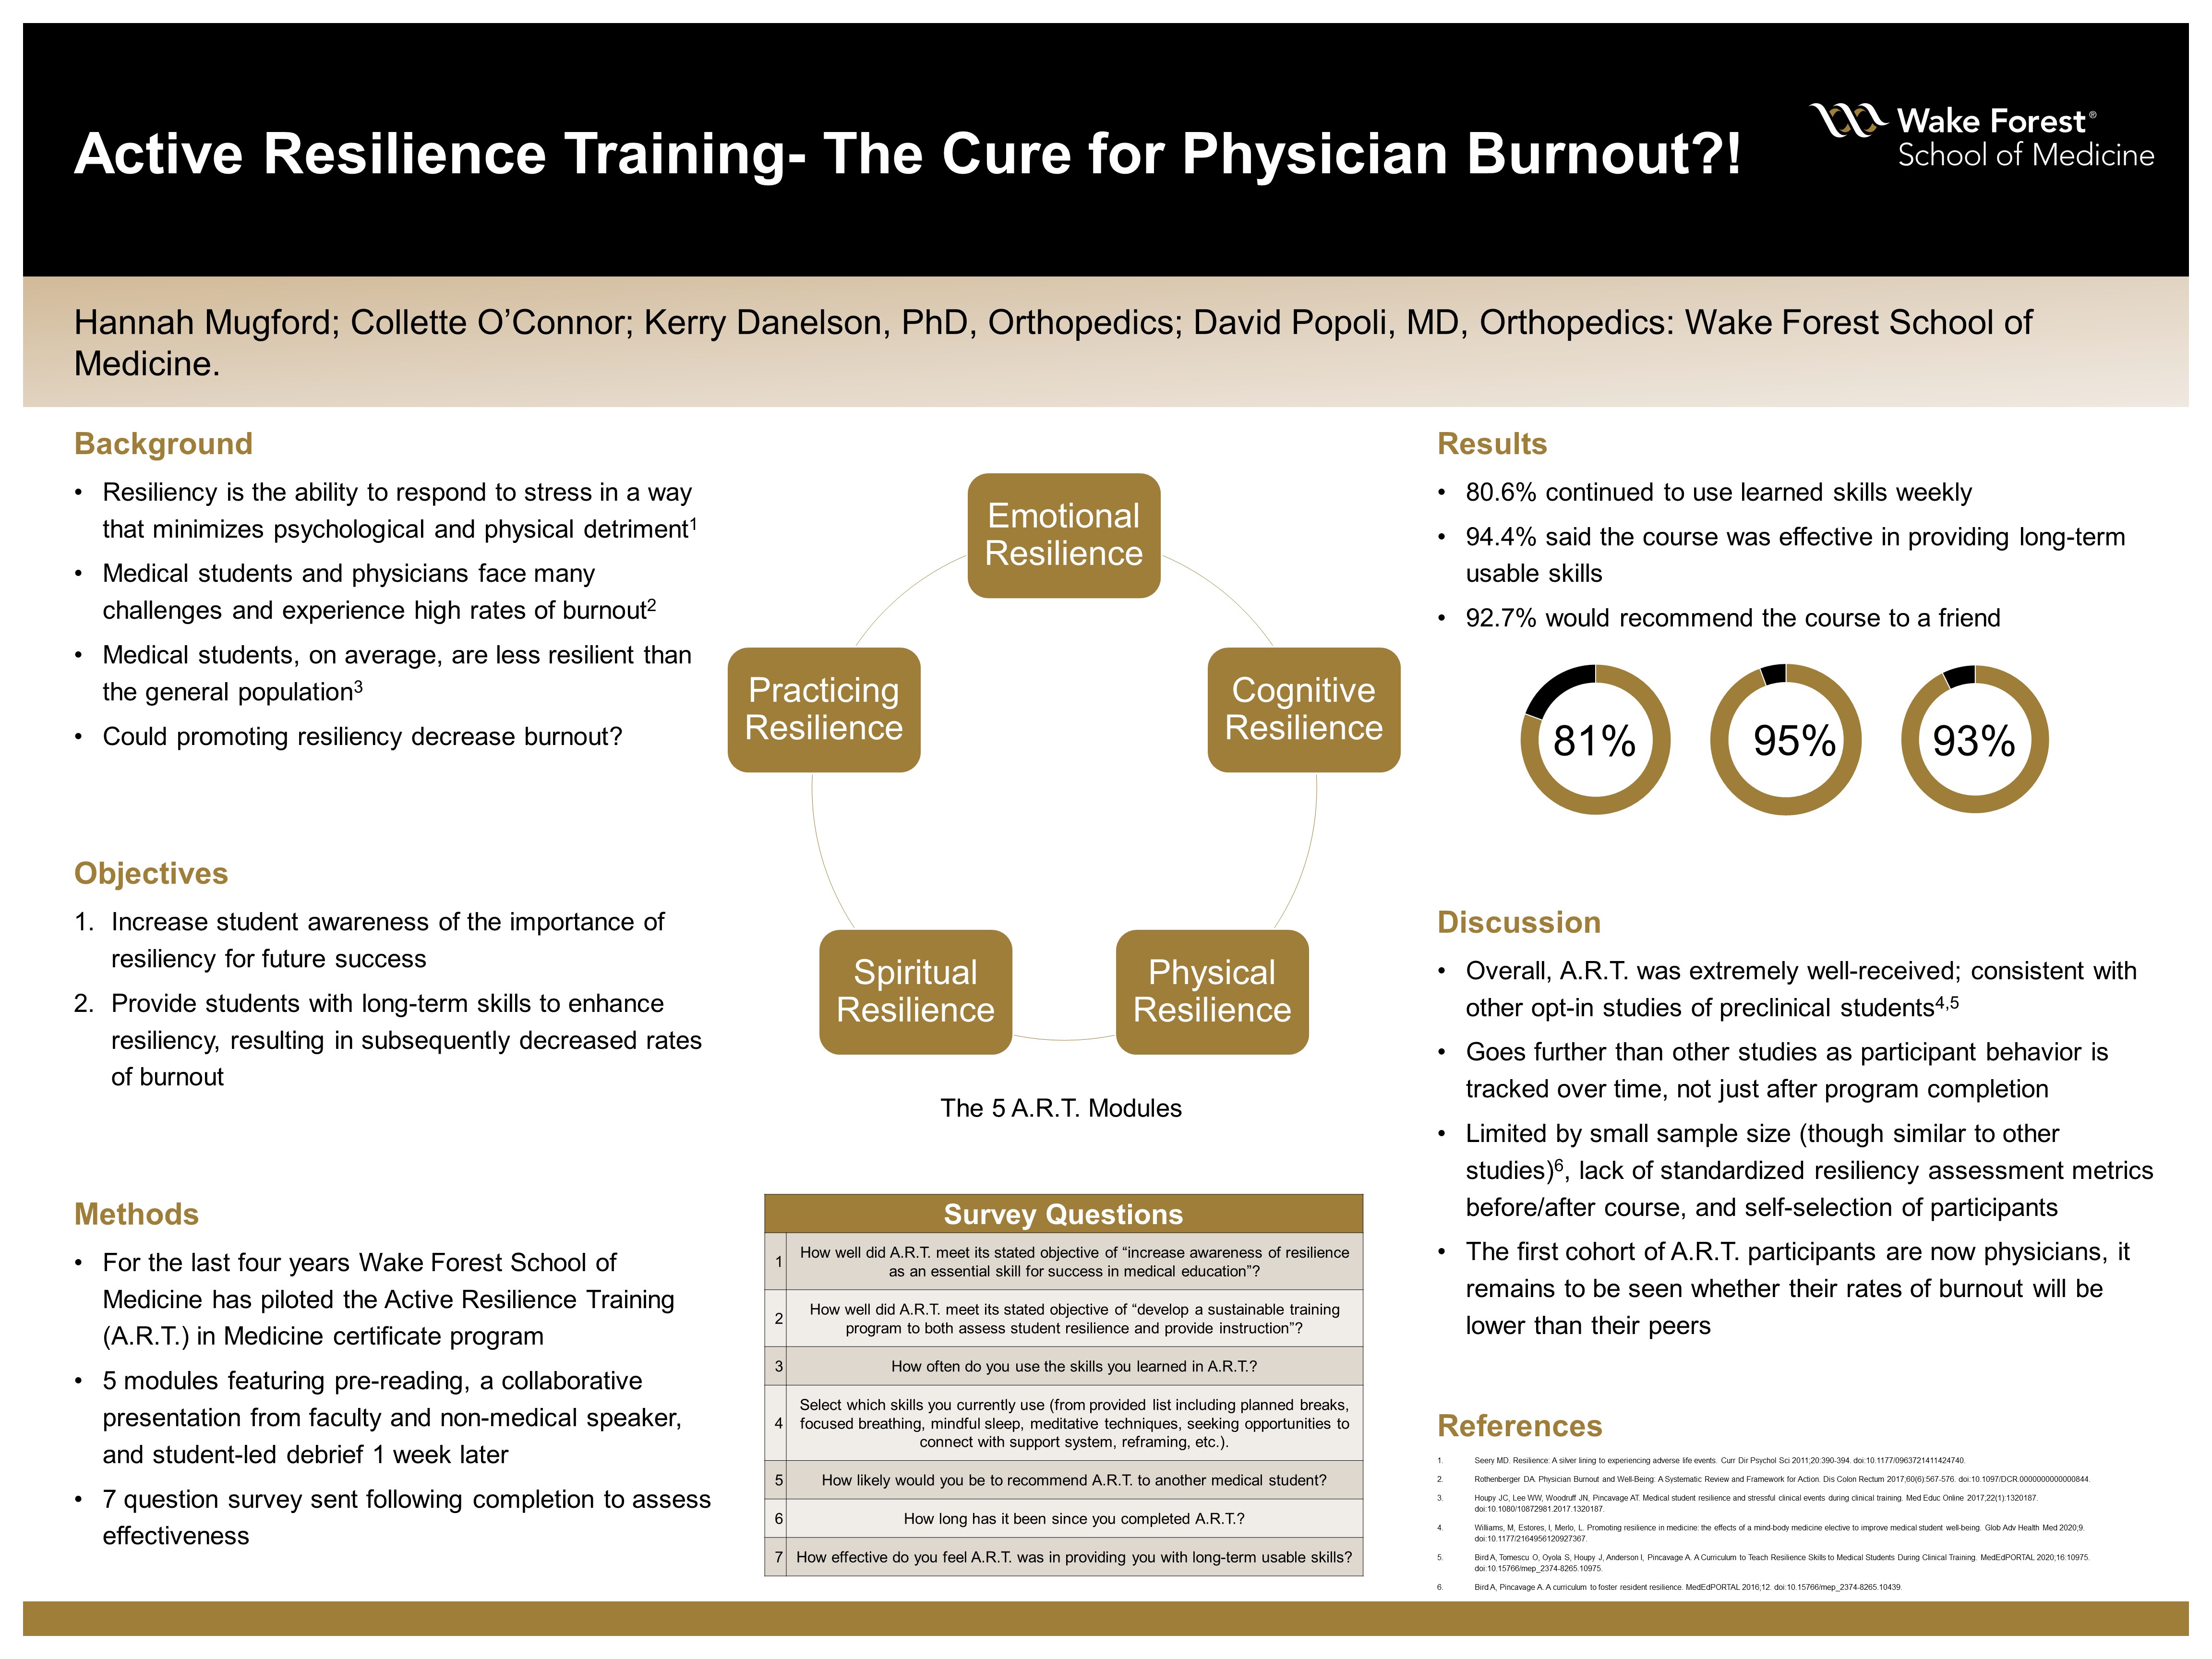 Showcase Image for Active Resilience Training- The Cure for Physician Burnout?!